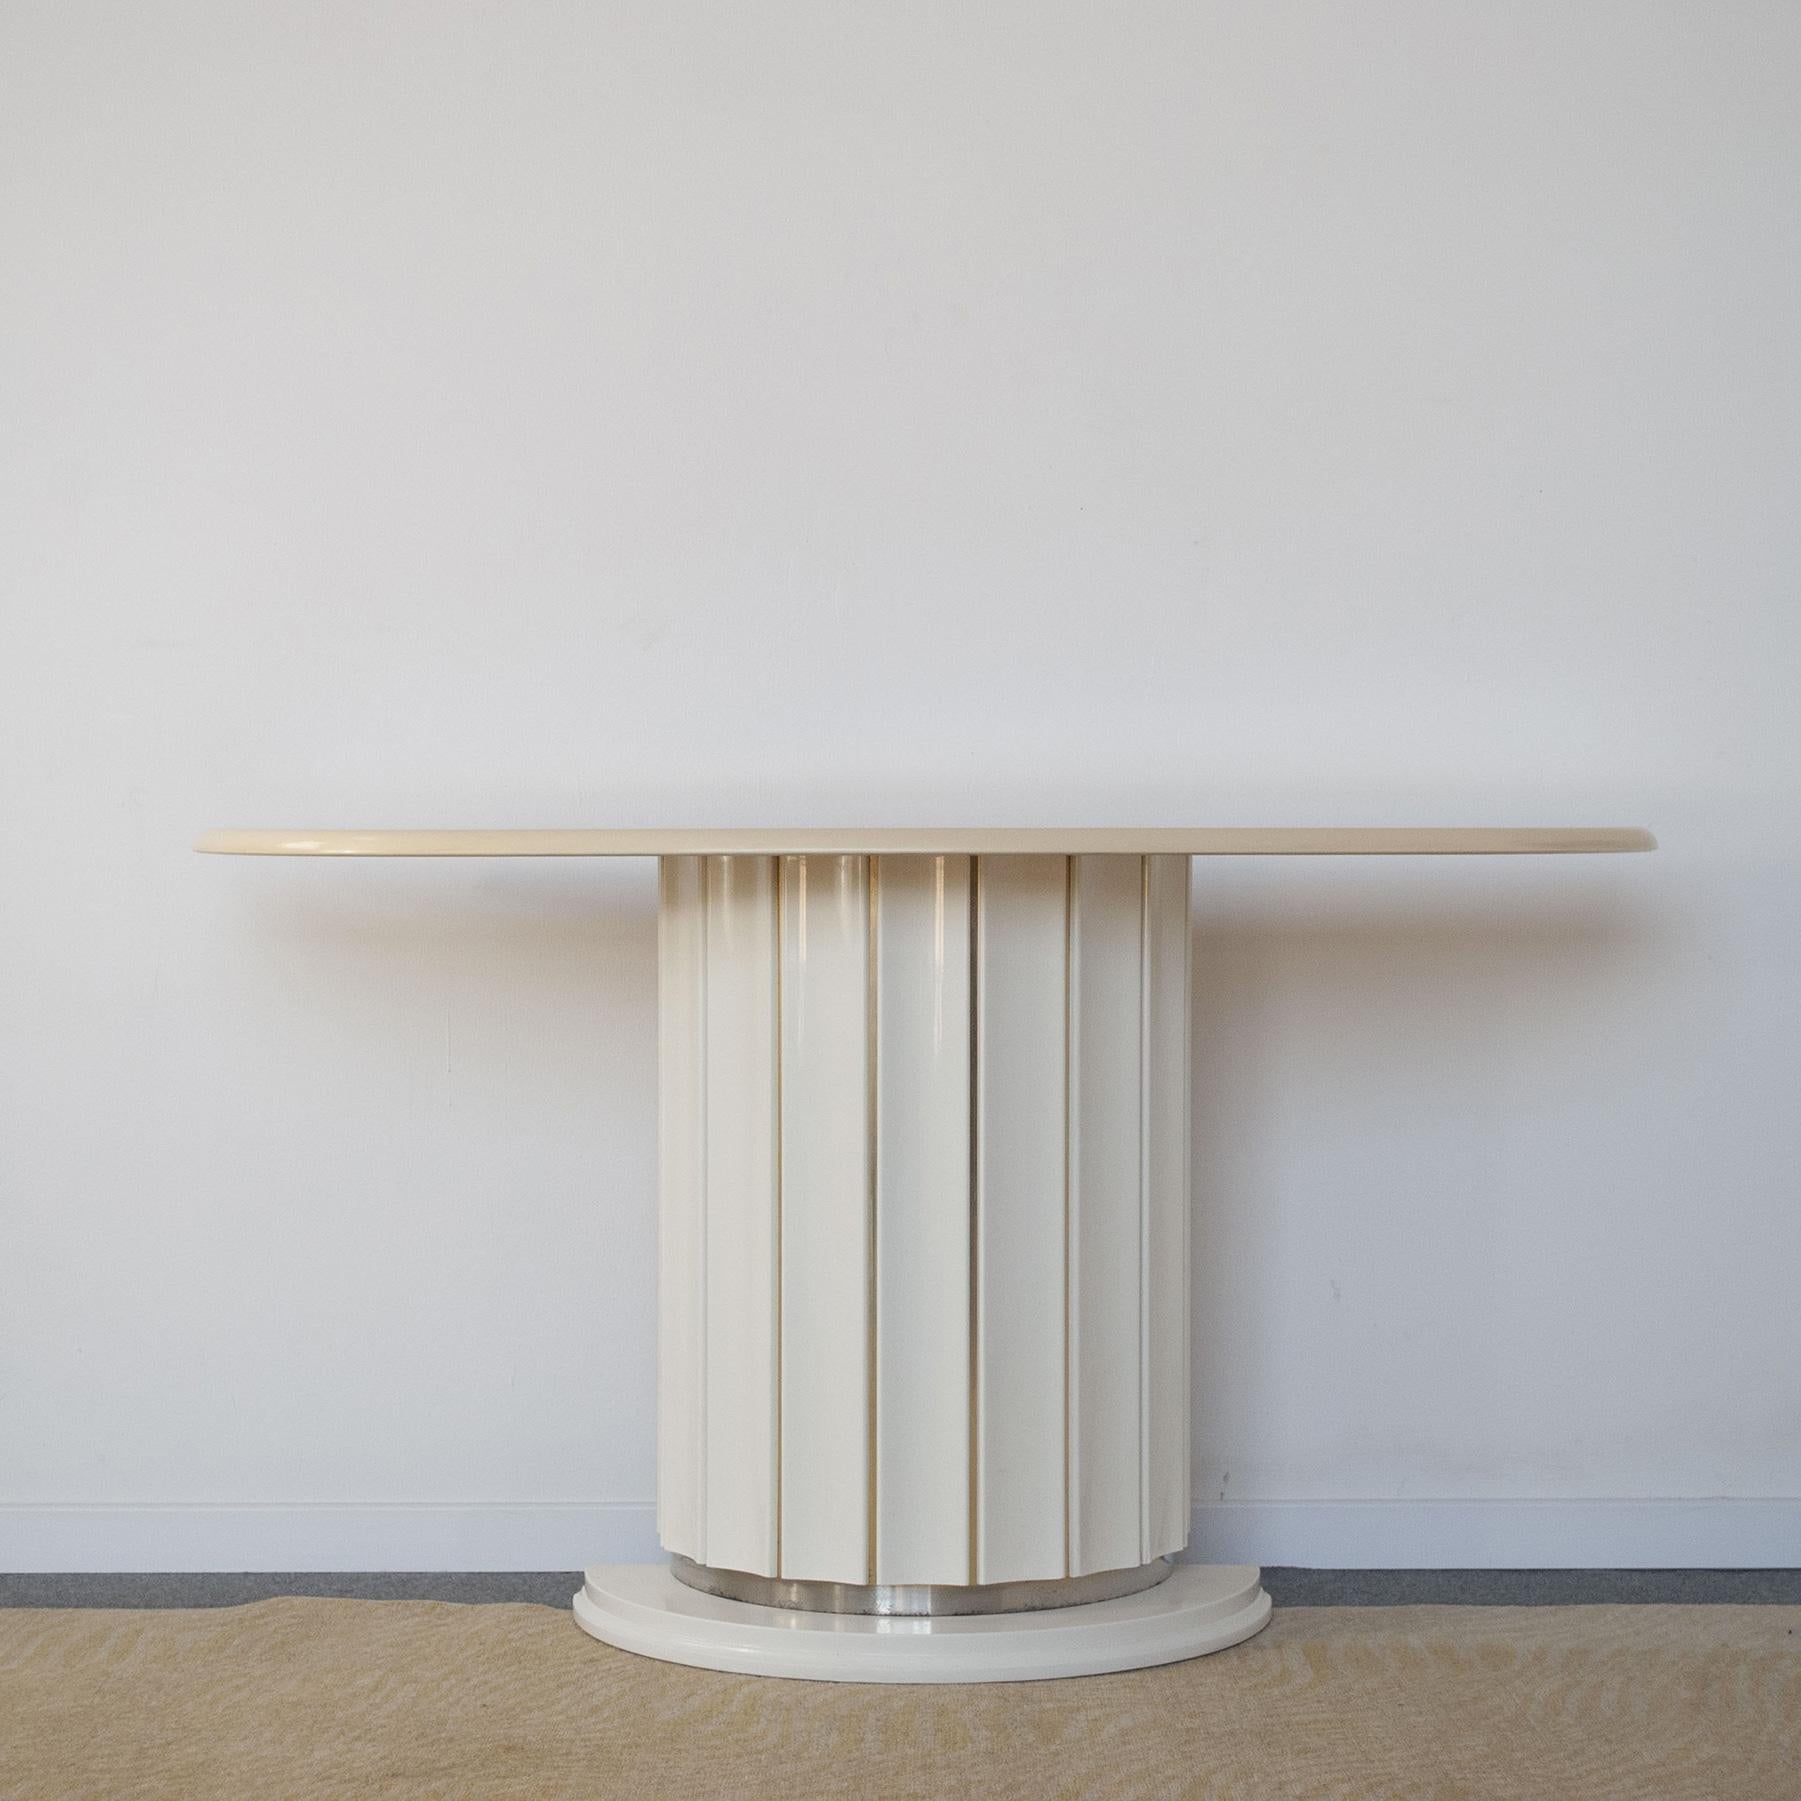 Italian console table from the late 1970s, modern Doric style, top in white lacquered wood, base in lacquered steel and brass profiles in the Aldo Tura style.